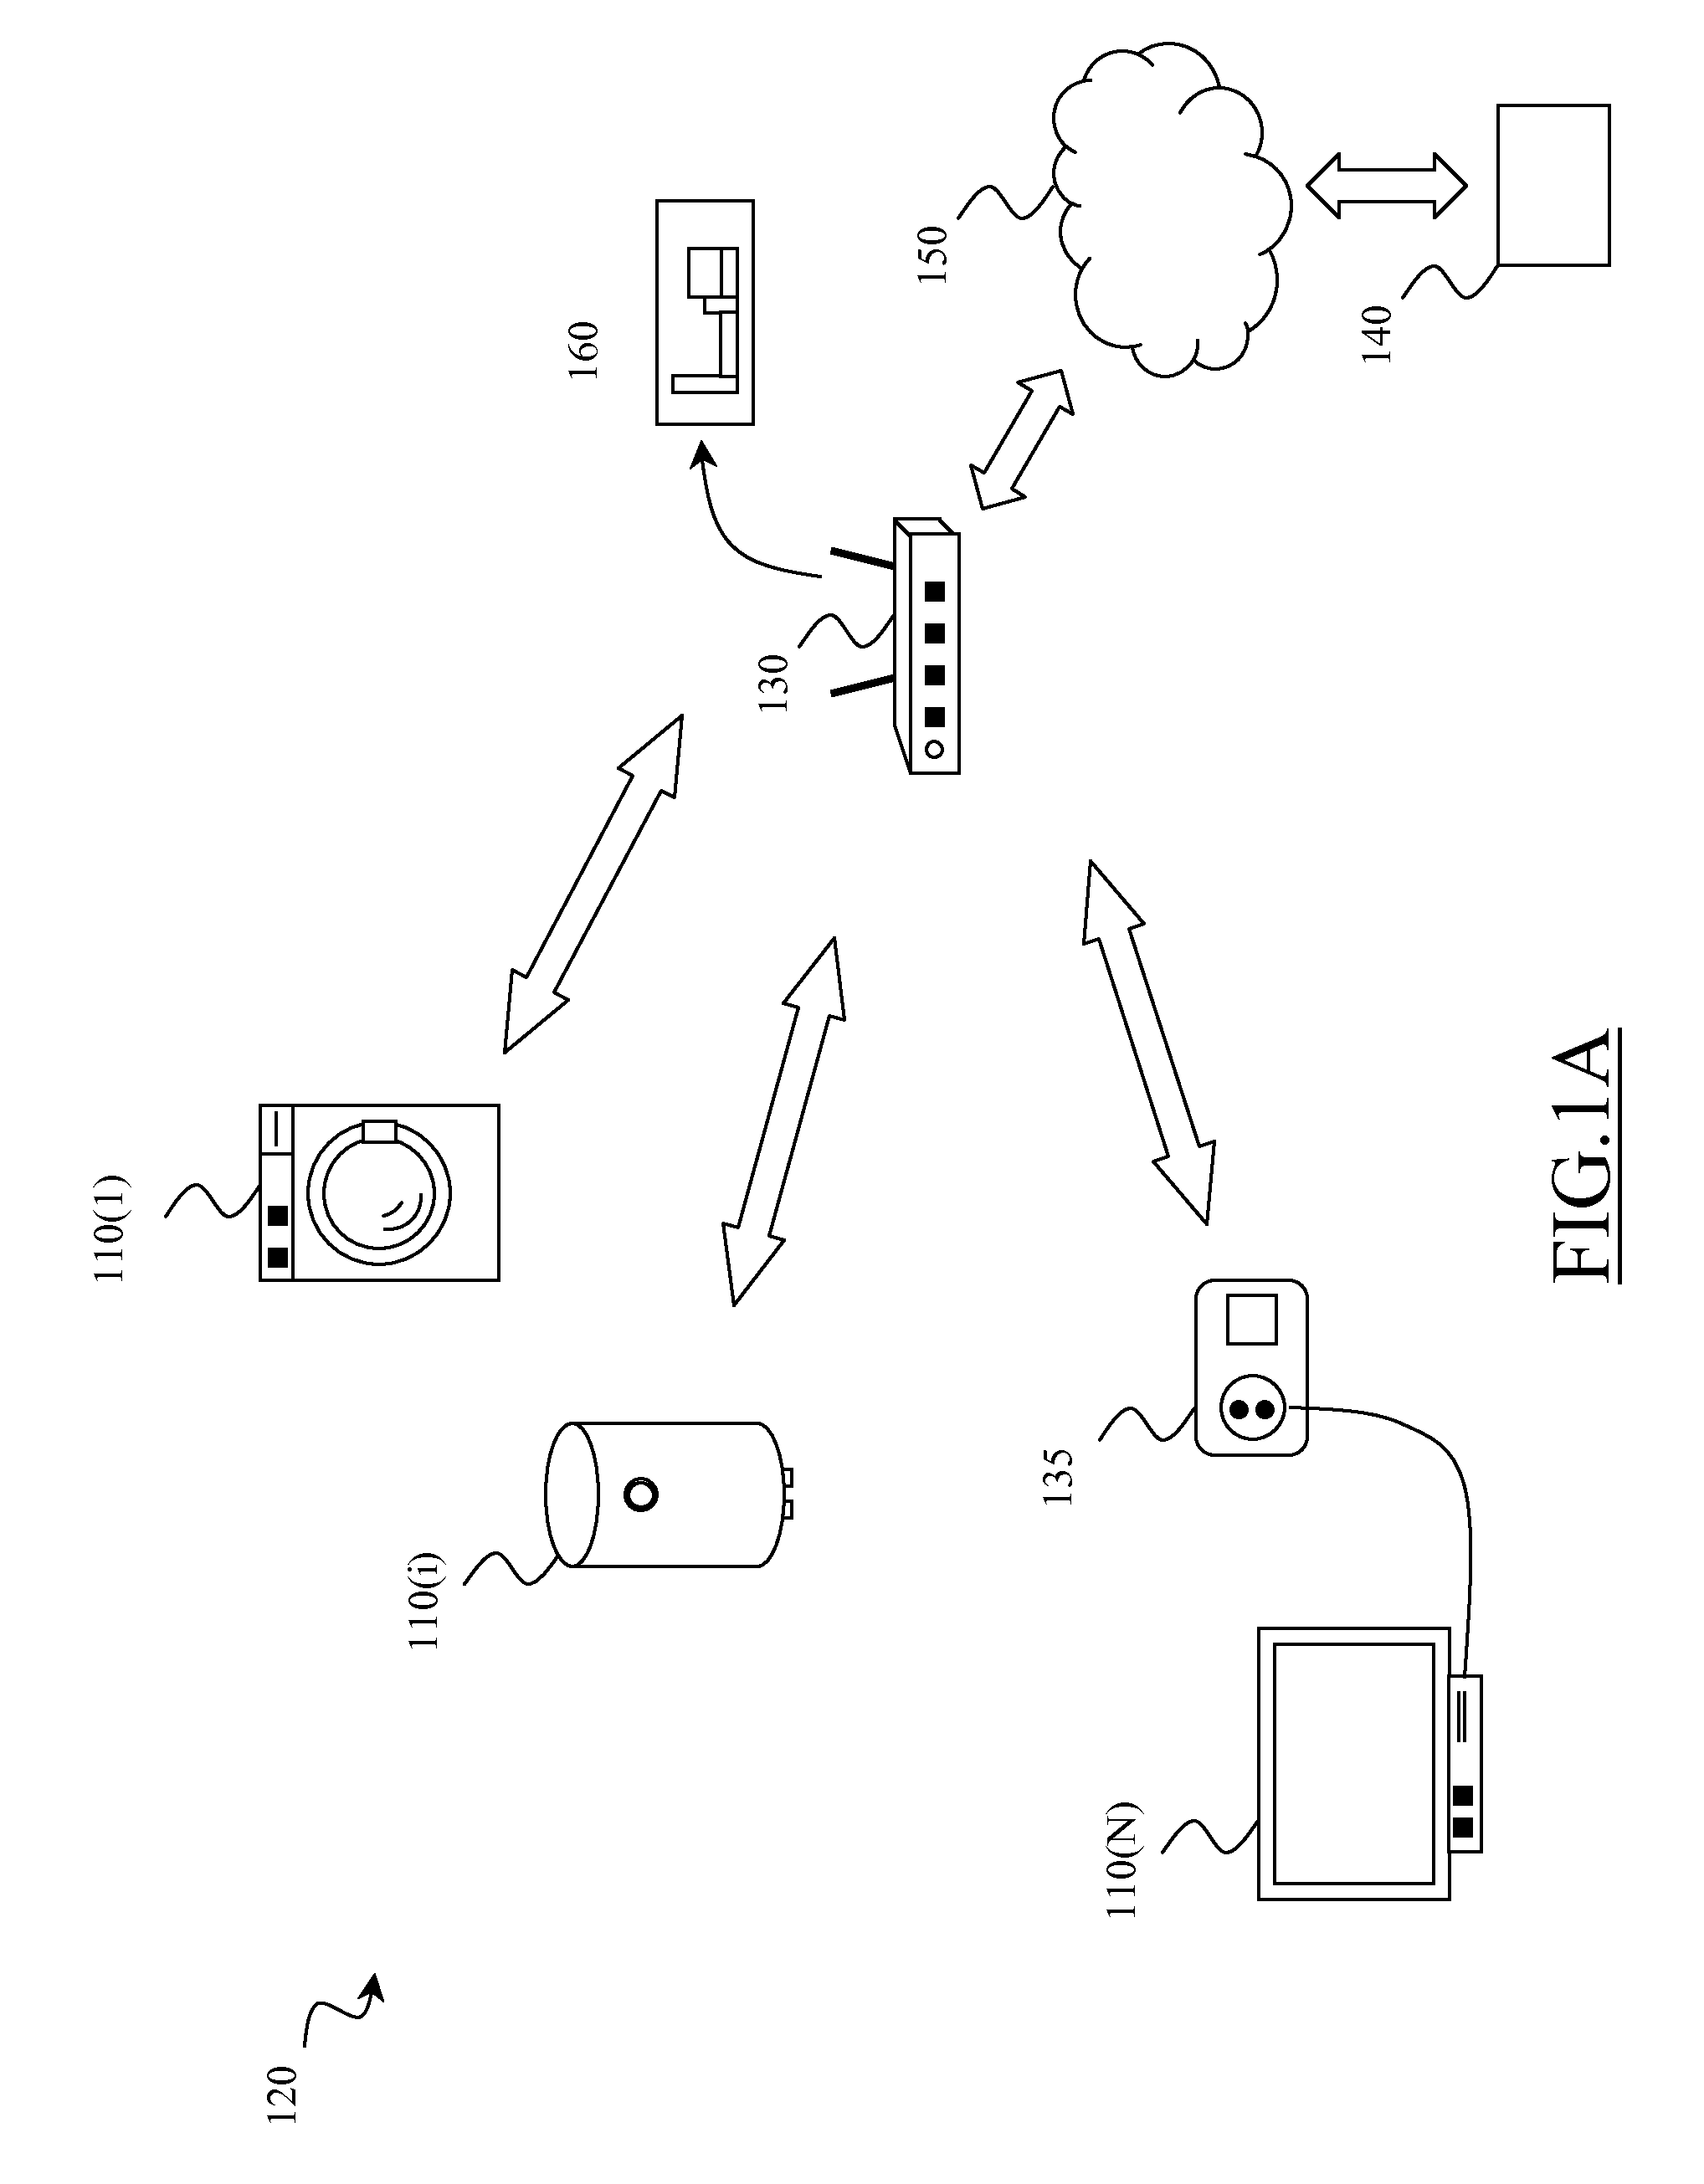 Automatic system for controlling appliances